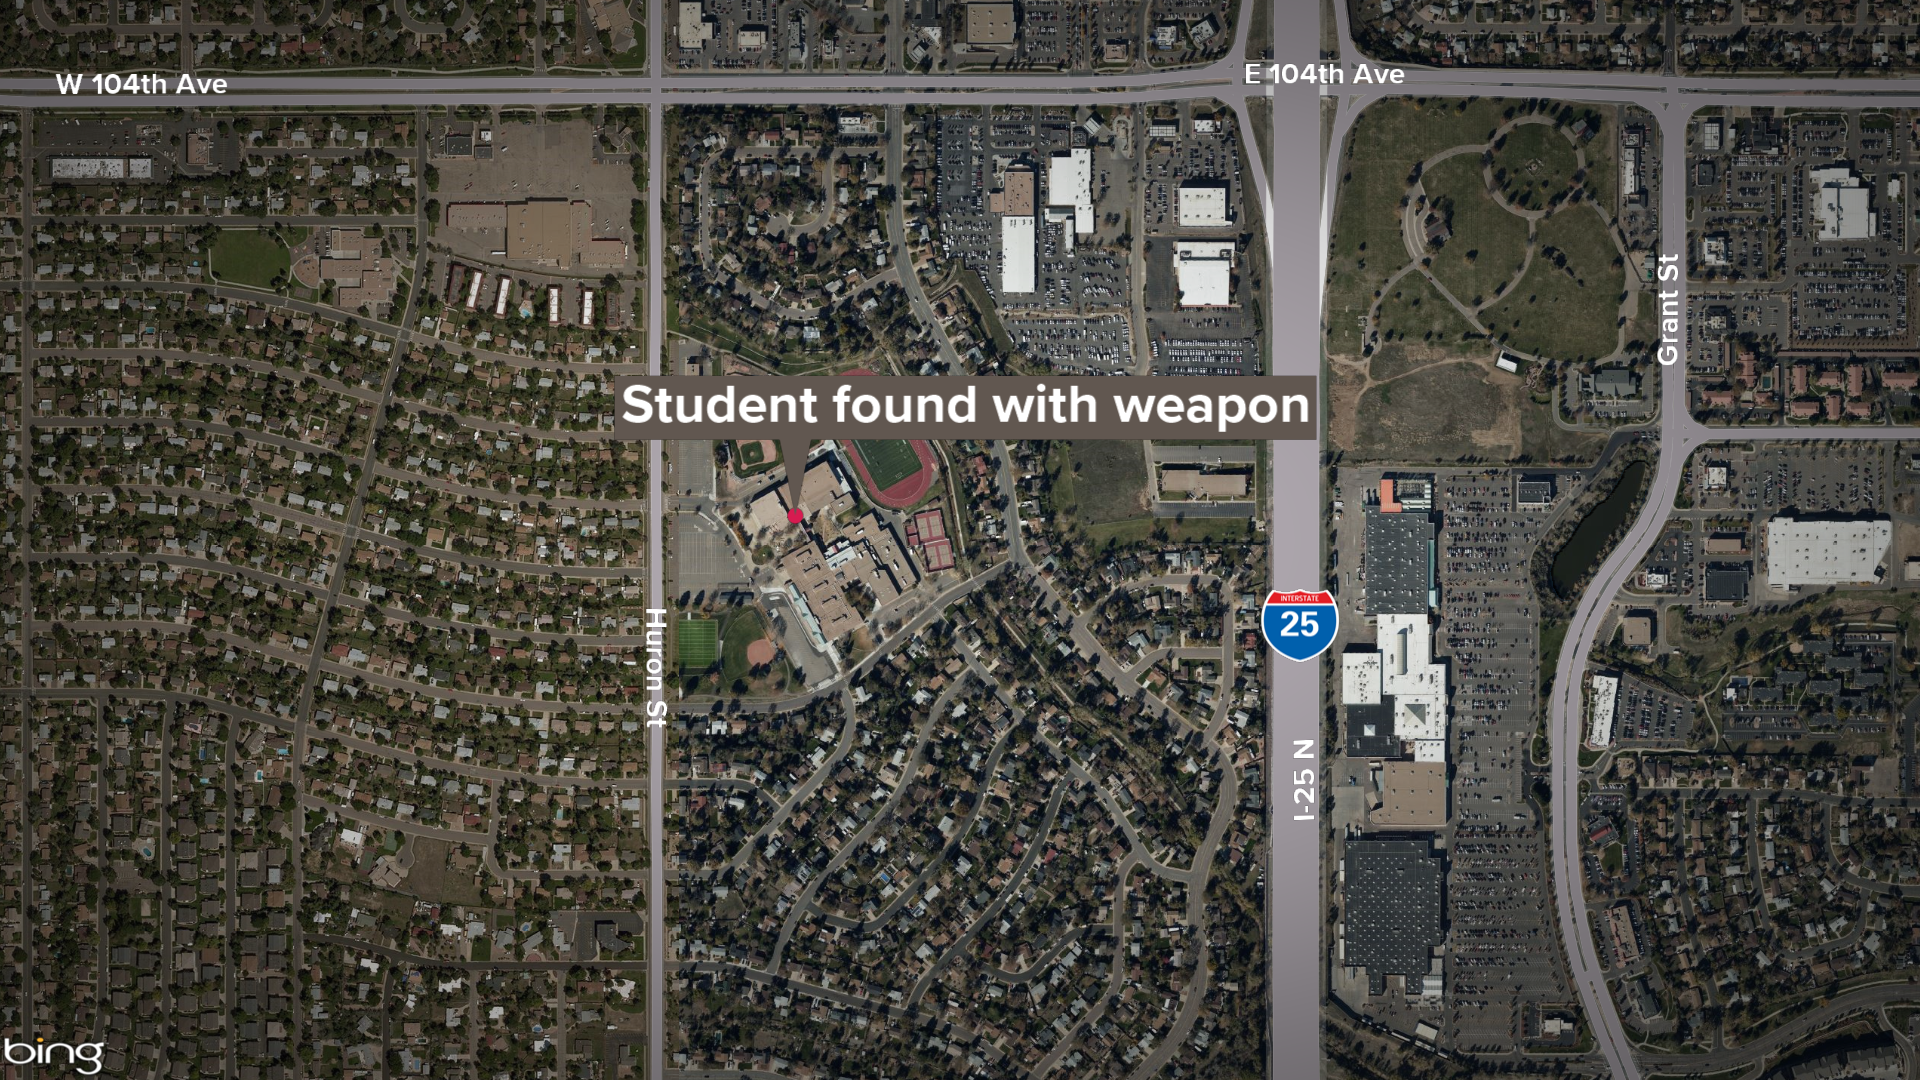 Acting on a tip, police contacted the student in a classroom and found he or she did have a weapon on campus.